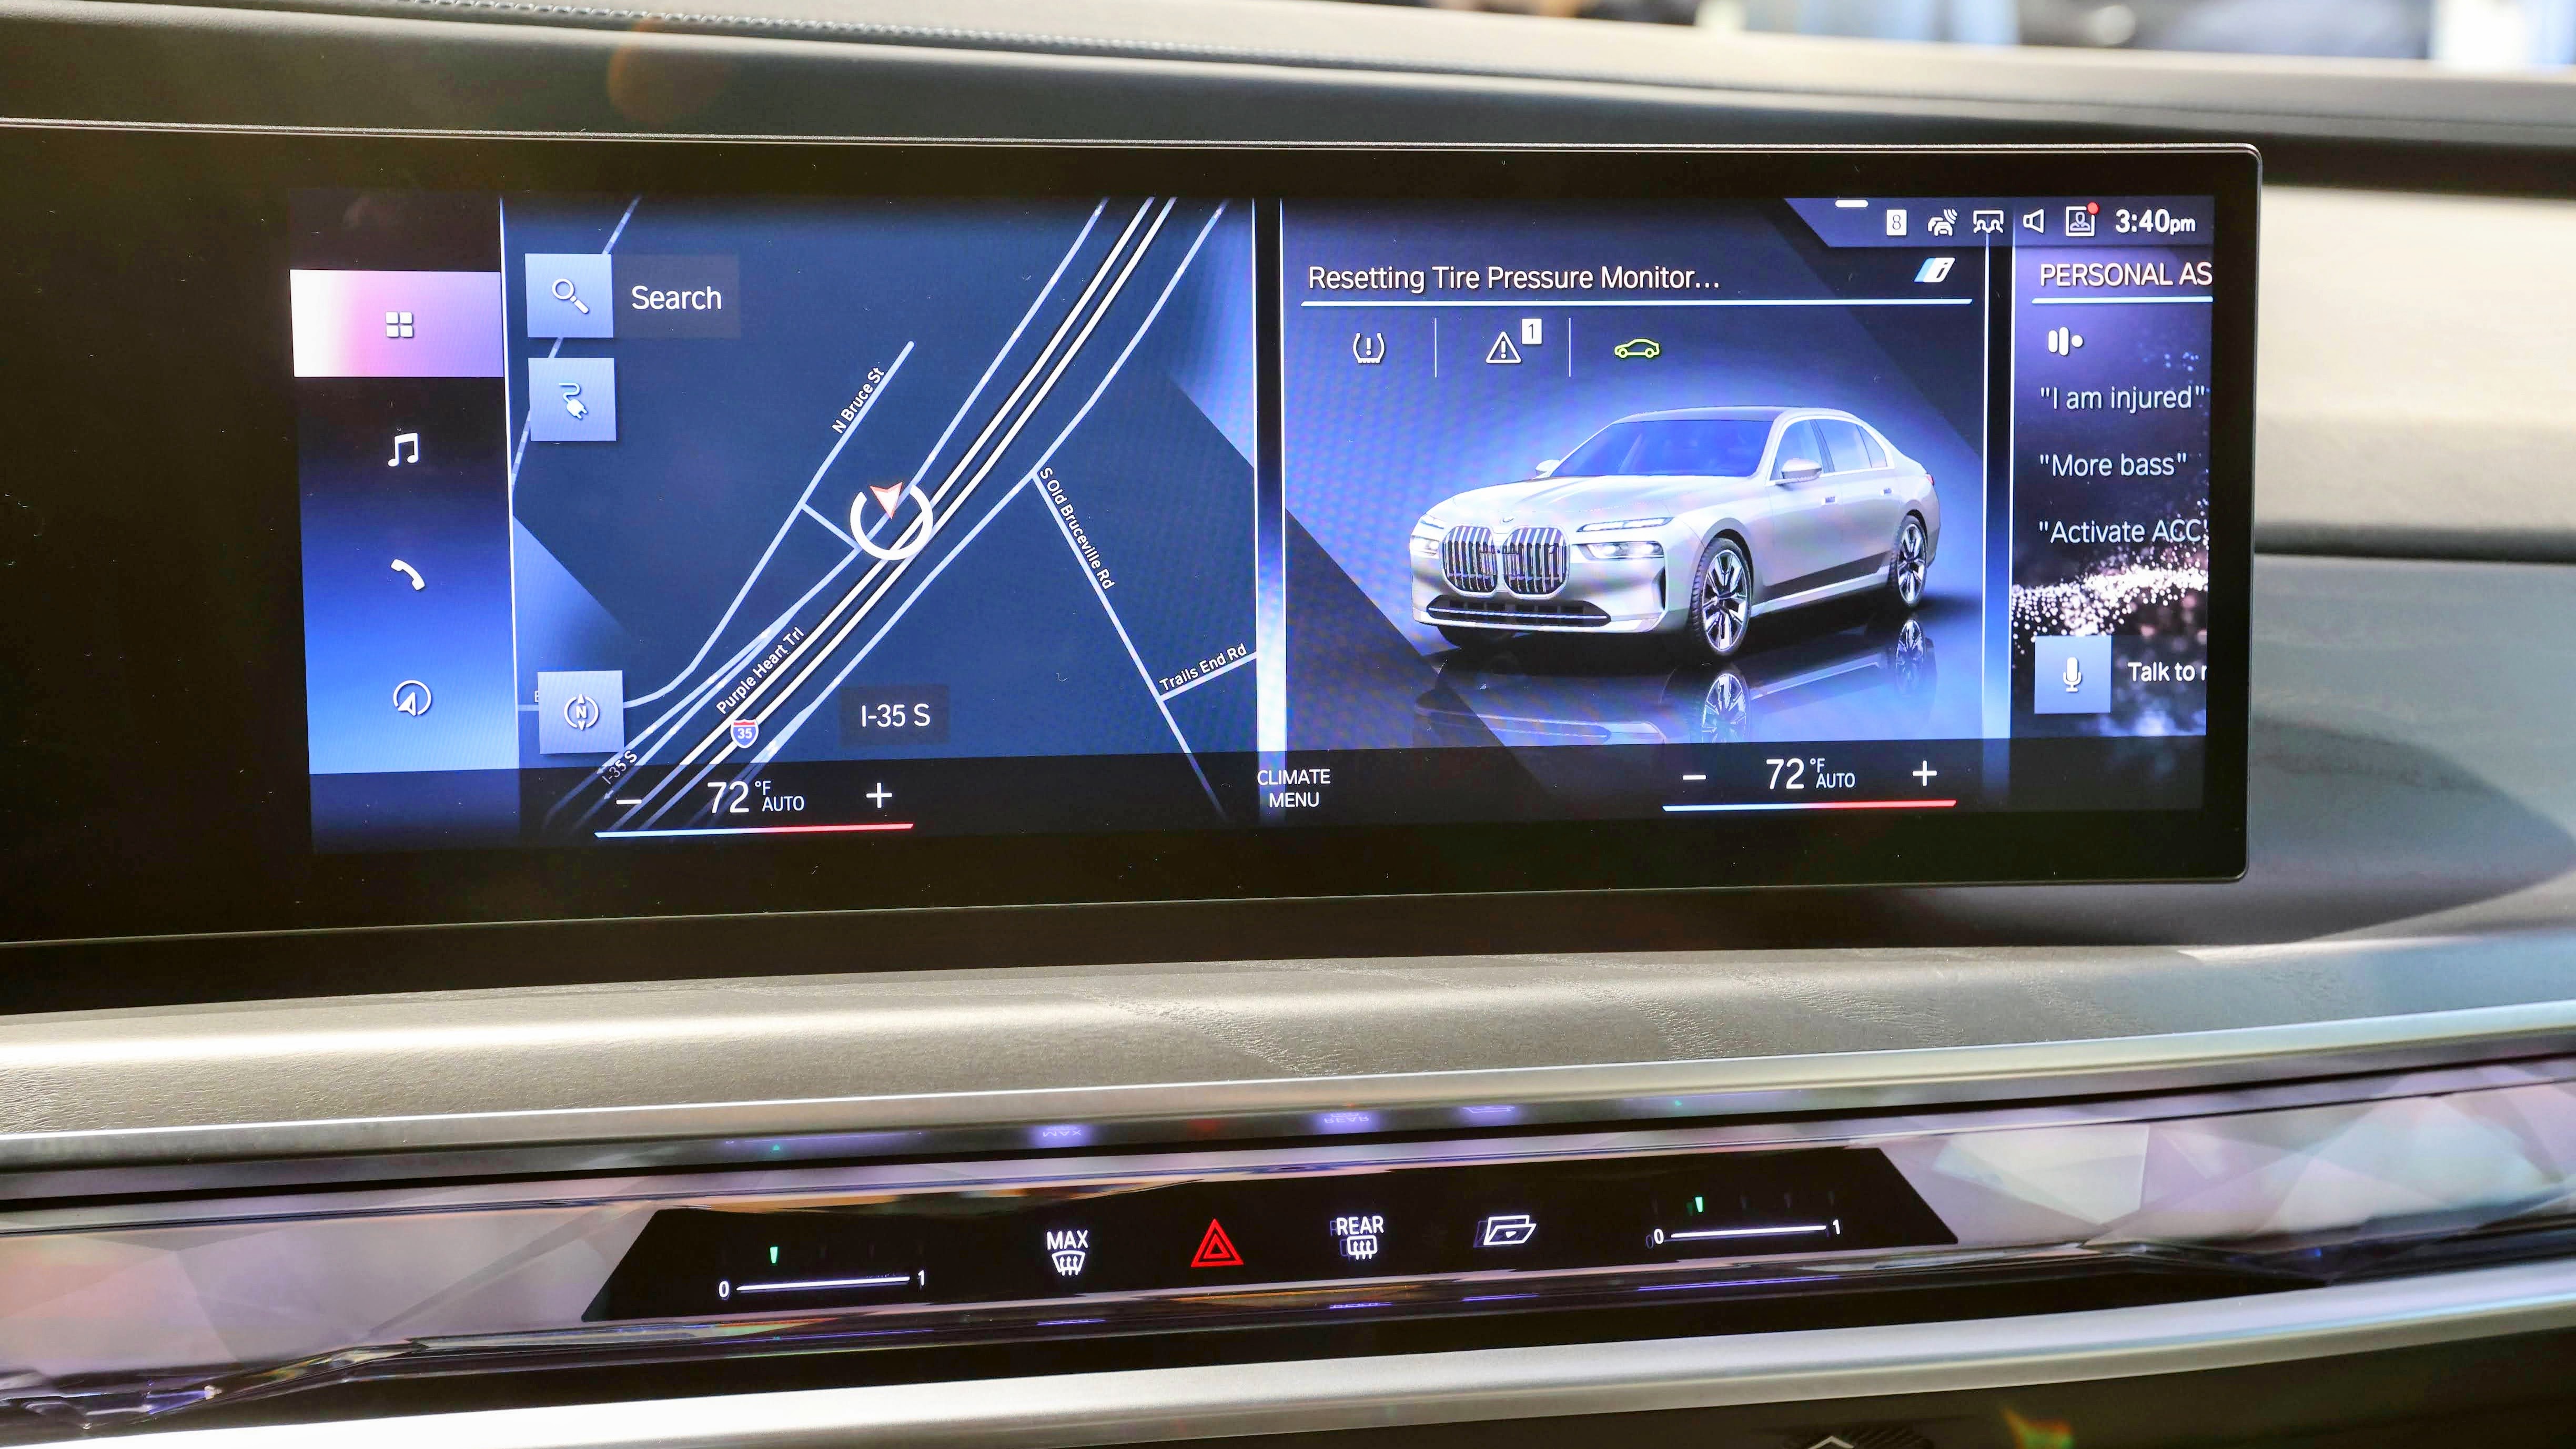 Large central display located in the center of the dashboard